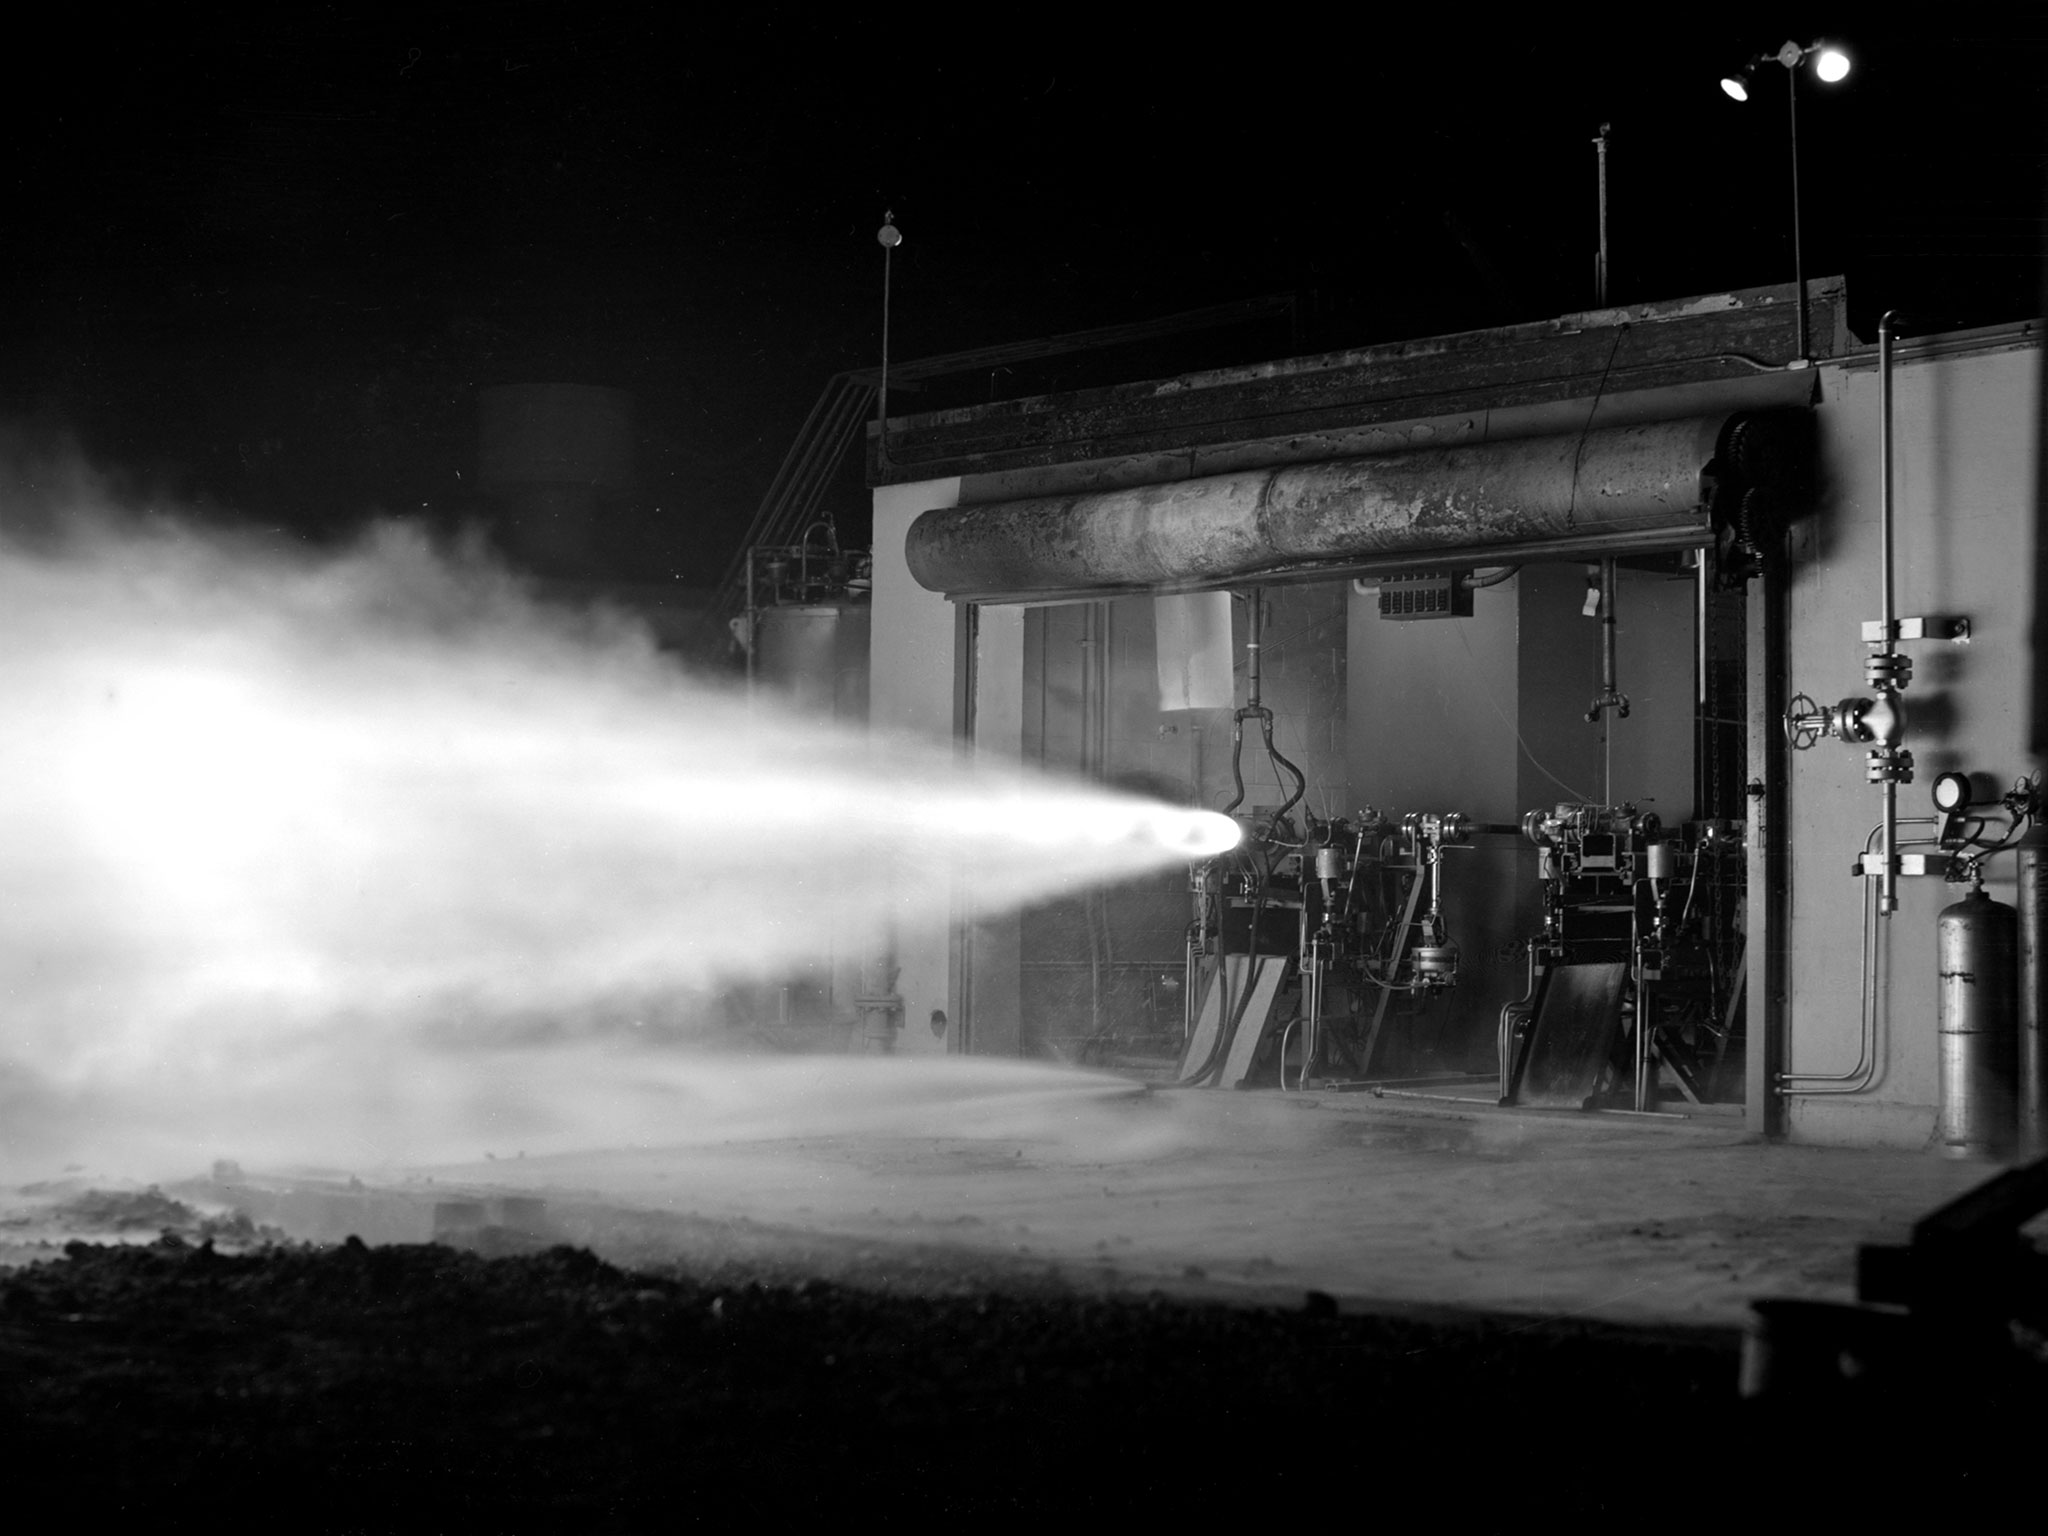 Nighttime firing of an engine out of a test cell.